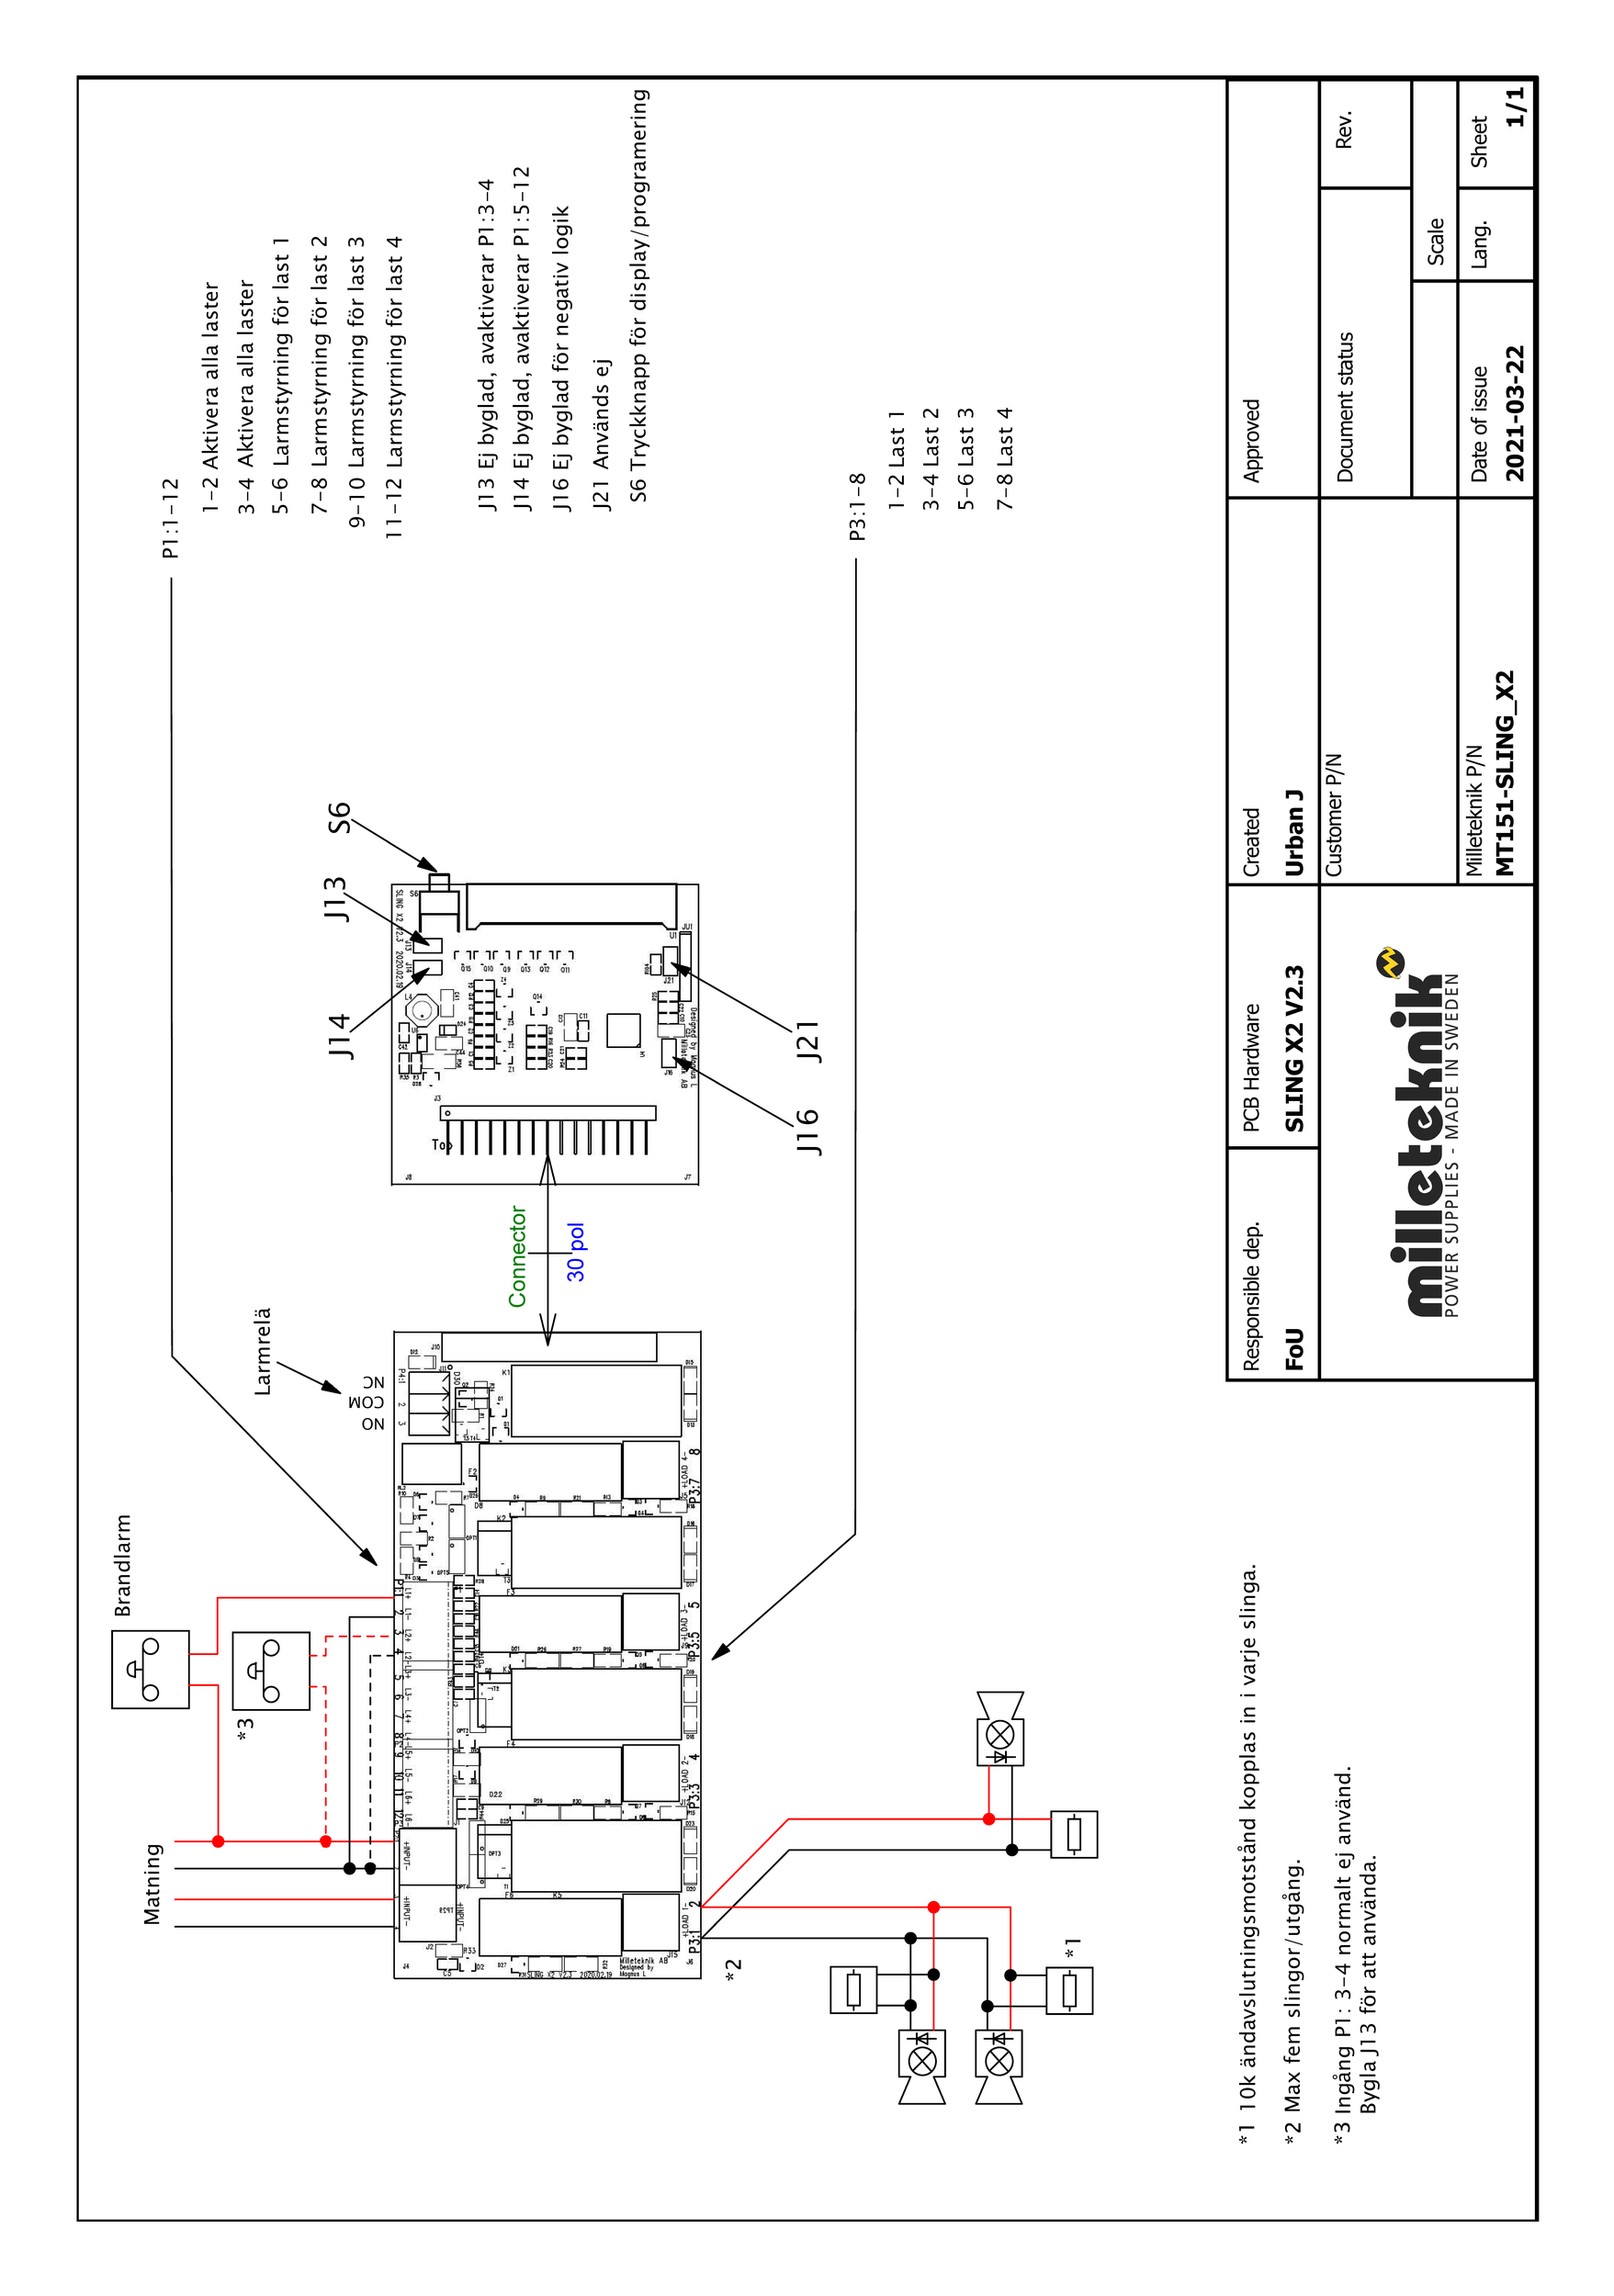 Wiring diagram Fire module 4 outputs